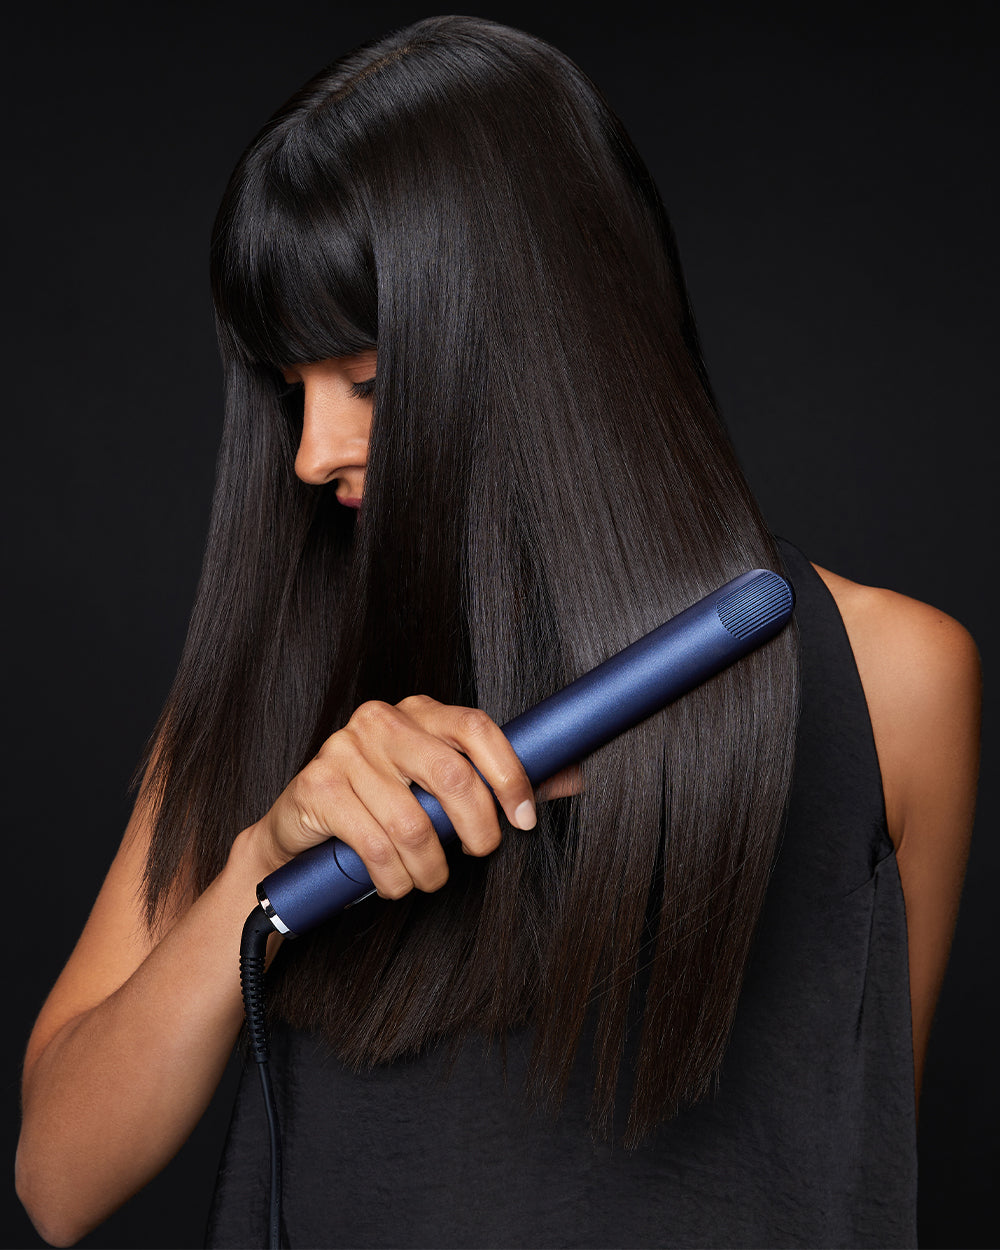 Model straightening her long, black hair with the 2-in-1 Contouring Iron Pro.